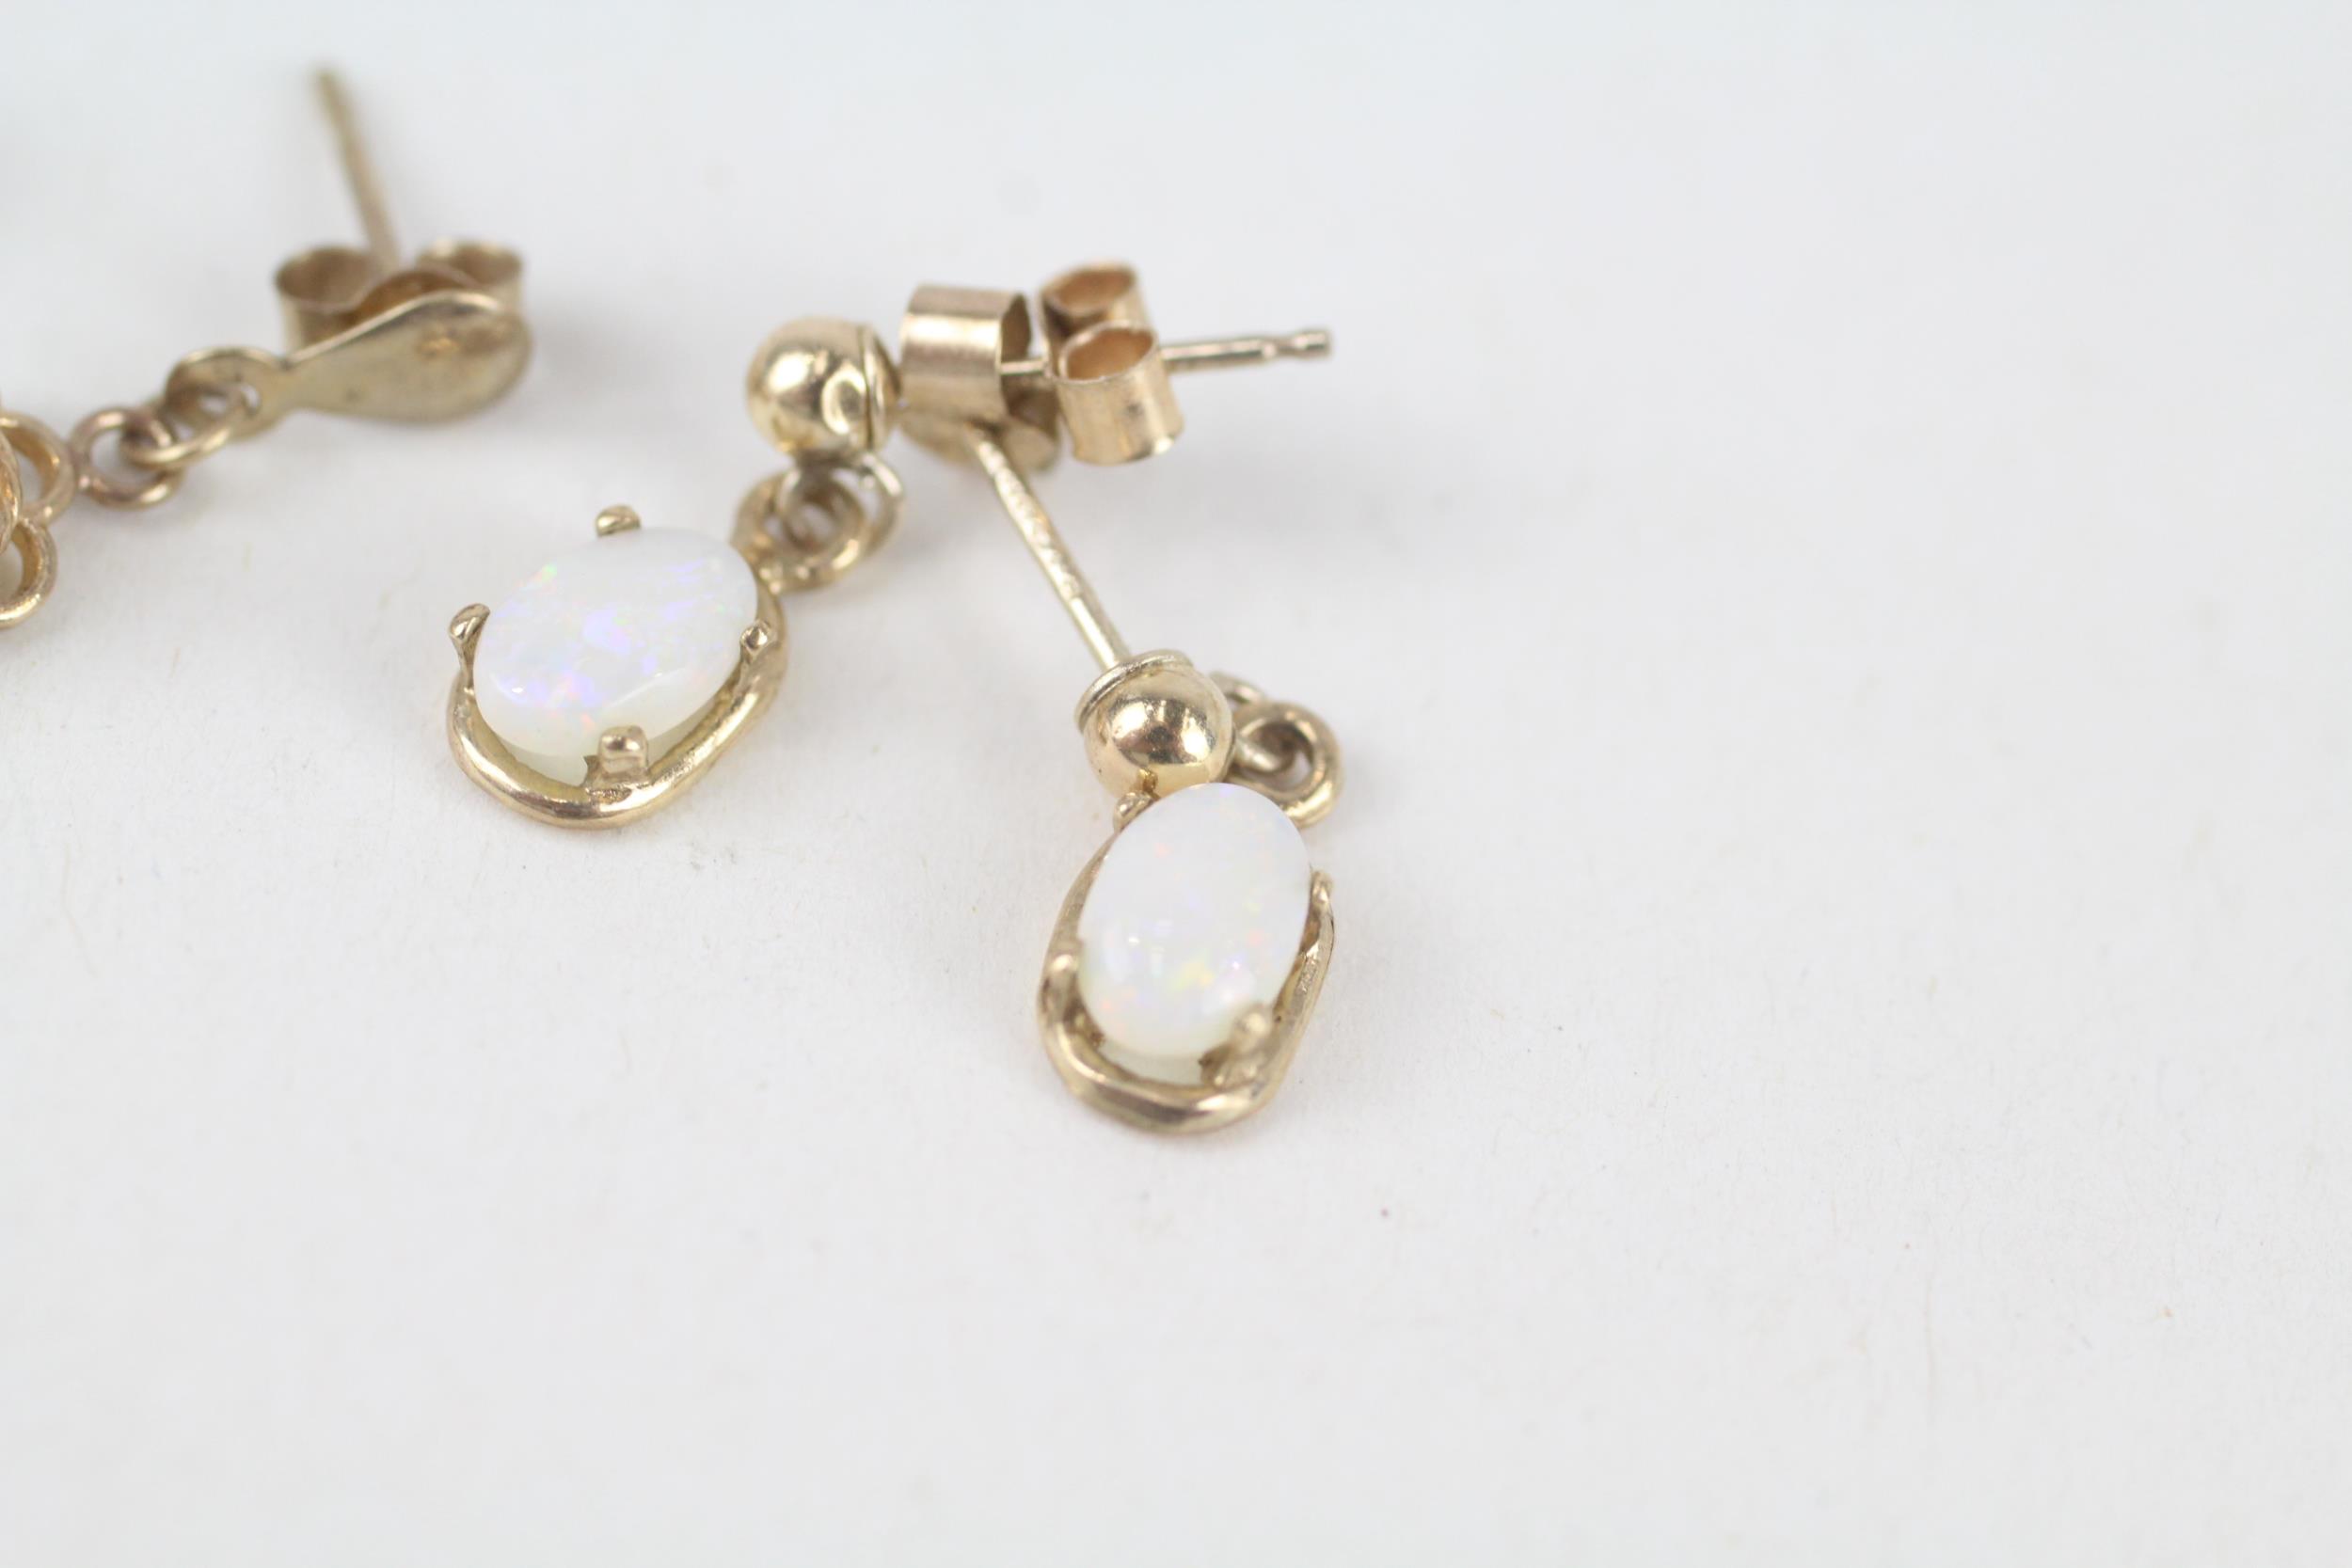 2x 9ct gold opal drop earrings with scroll backs 1.8 g - Image 5 of 5